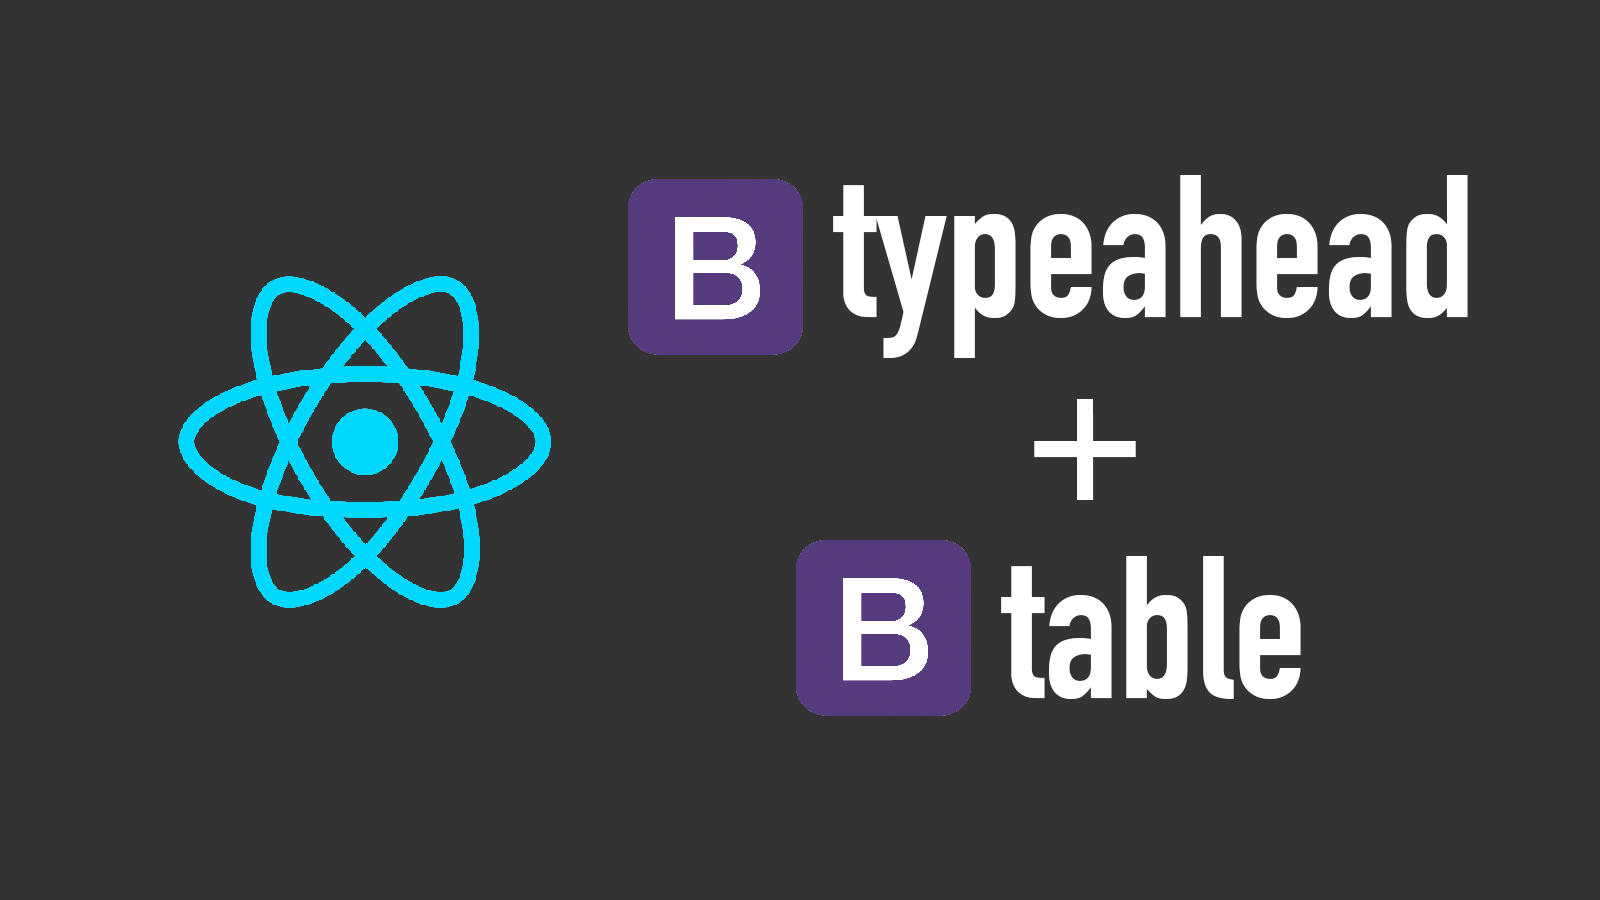 Implementing react-bootstrap-typeahead with react-bootstrap-table